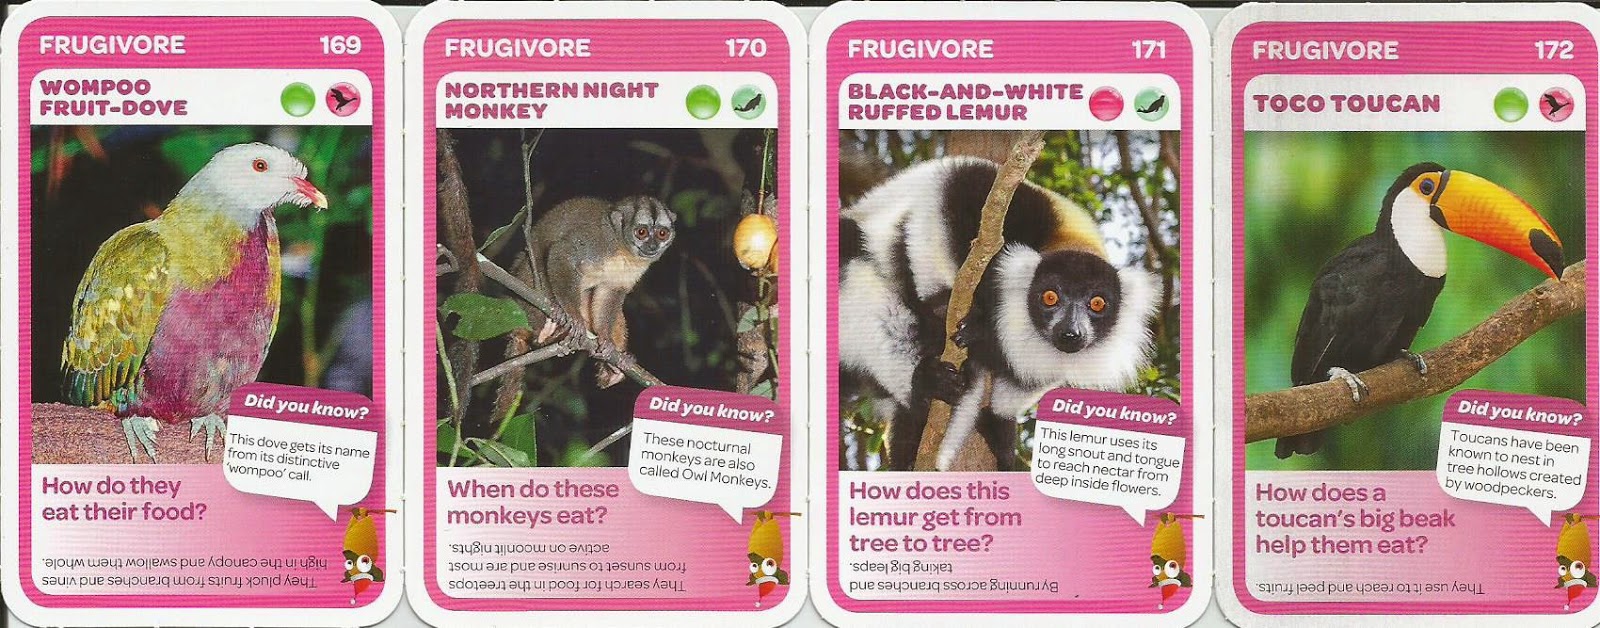 GeoBloxJF: Woolworths Super Animals Frugivore Christmas Edition Collection